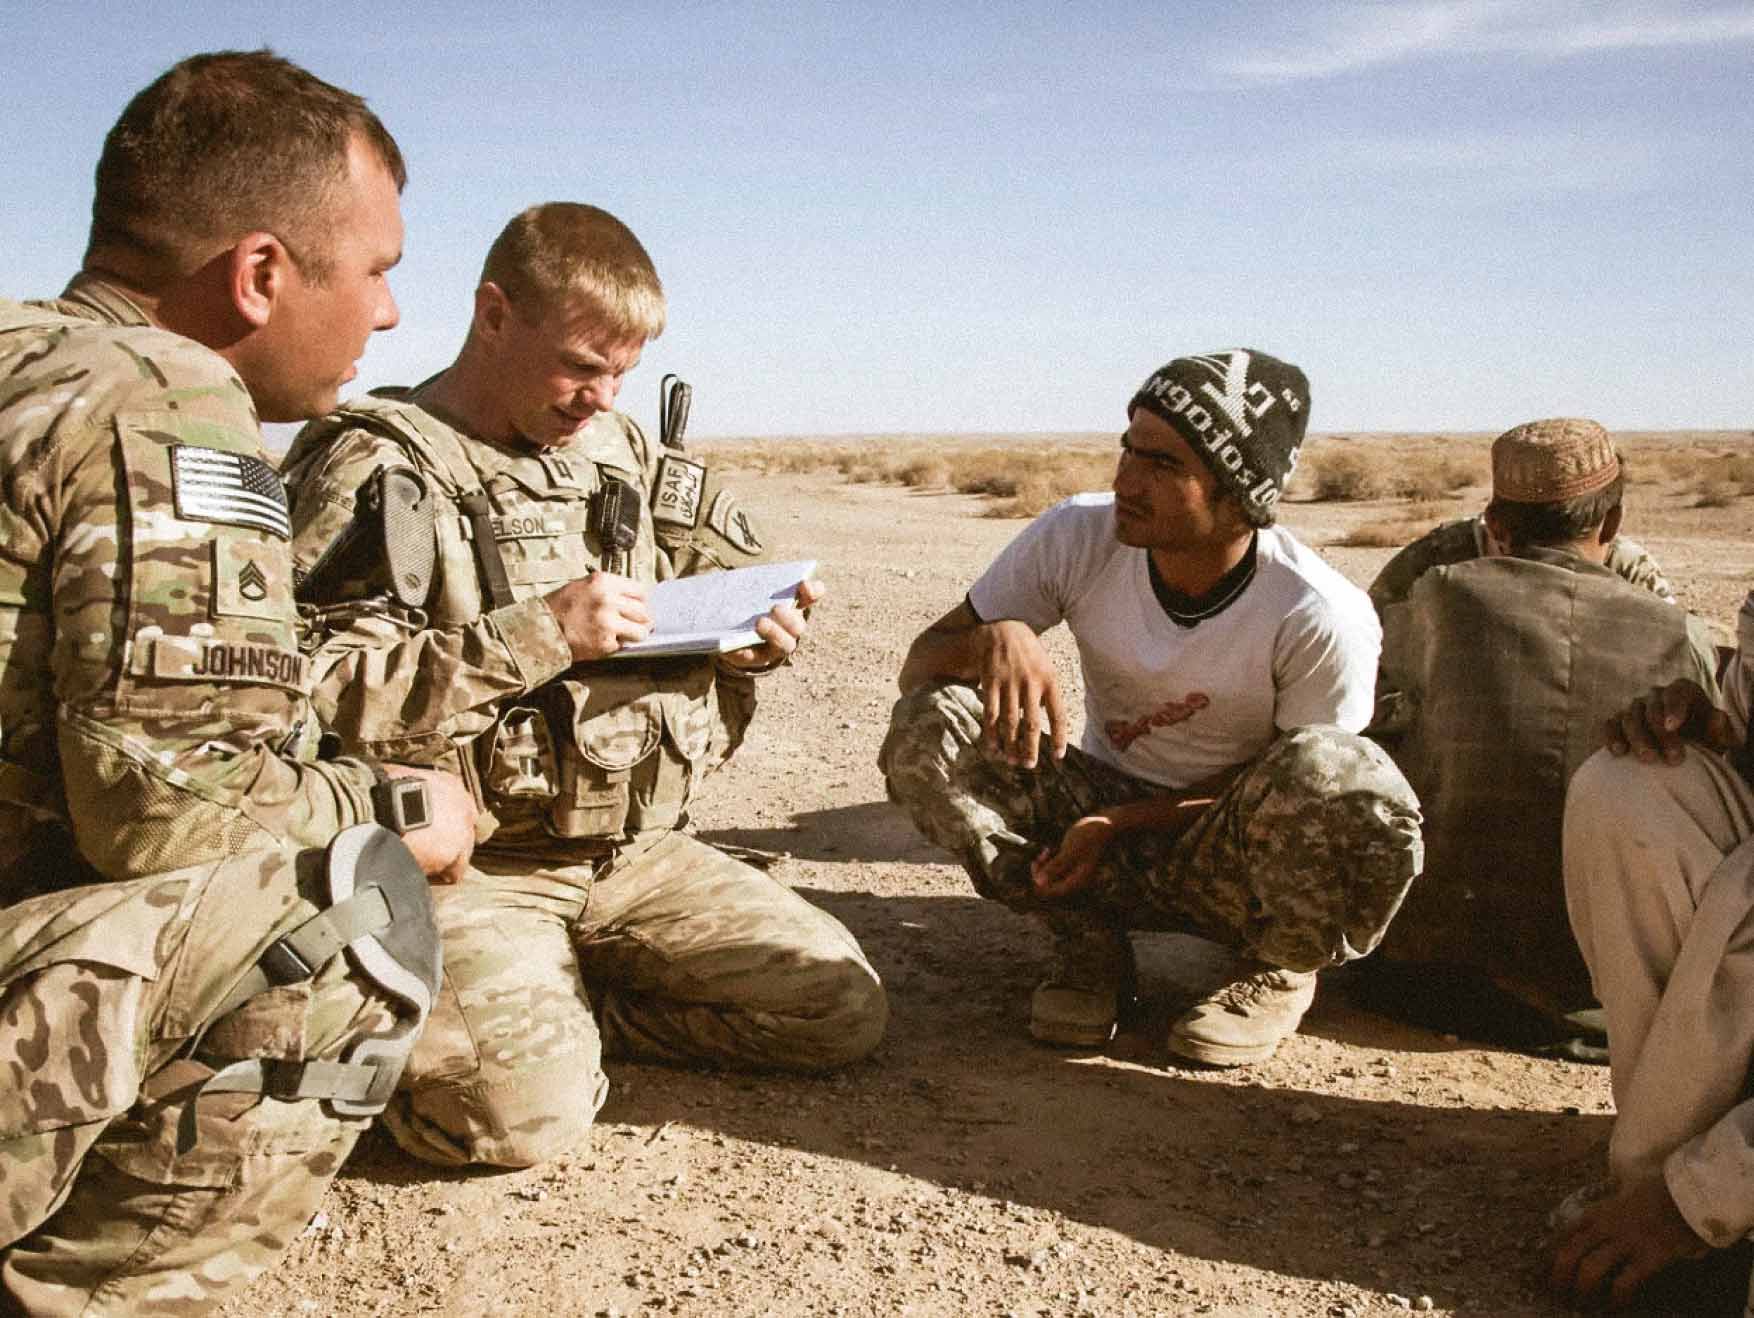 Two Soldiers speaking to local civilians in a desert